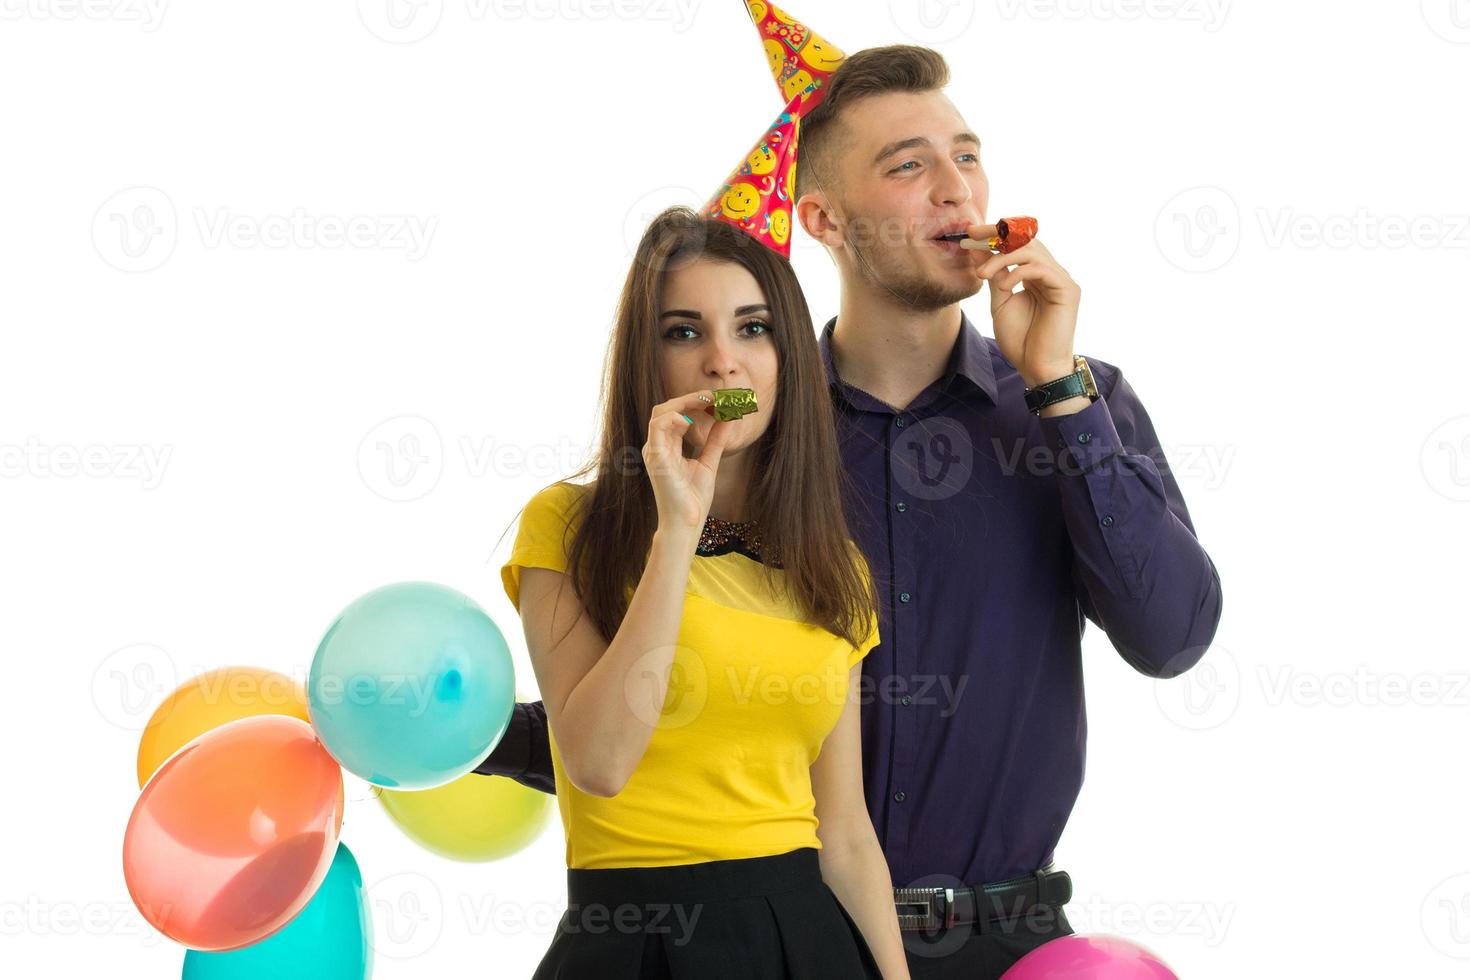 pretty funny girl and the guy holding balloons and blow horns close-up photo